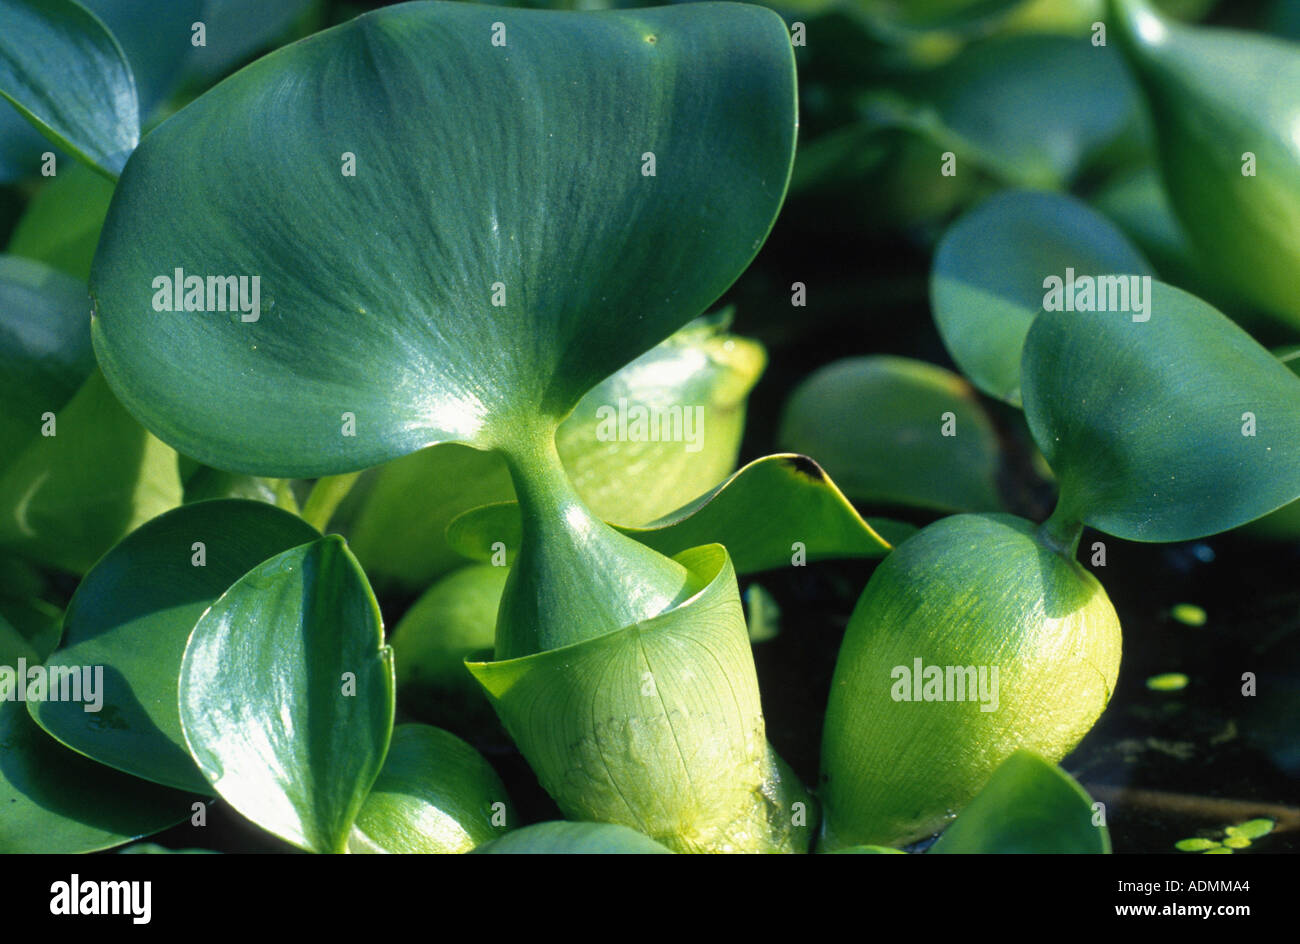 waterhyacinth, common water-hyacinth (Eichhornia crassipes), leaves Stock Photo